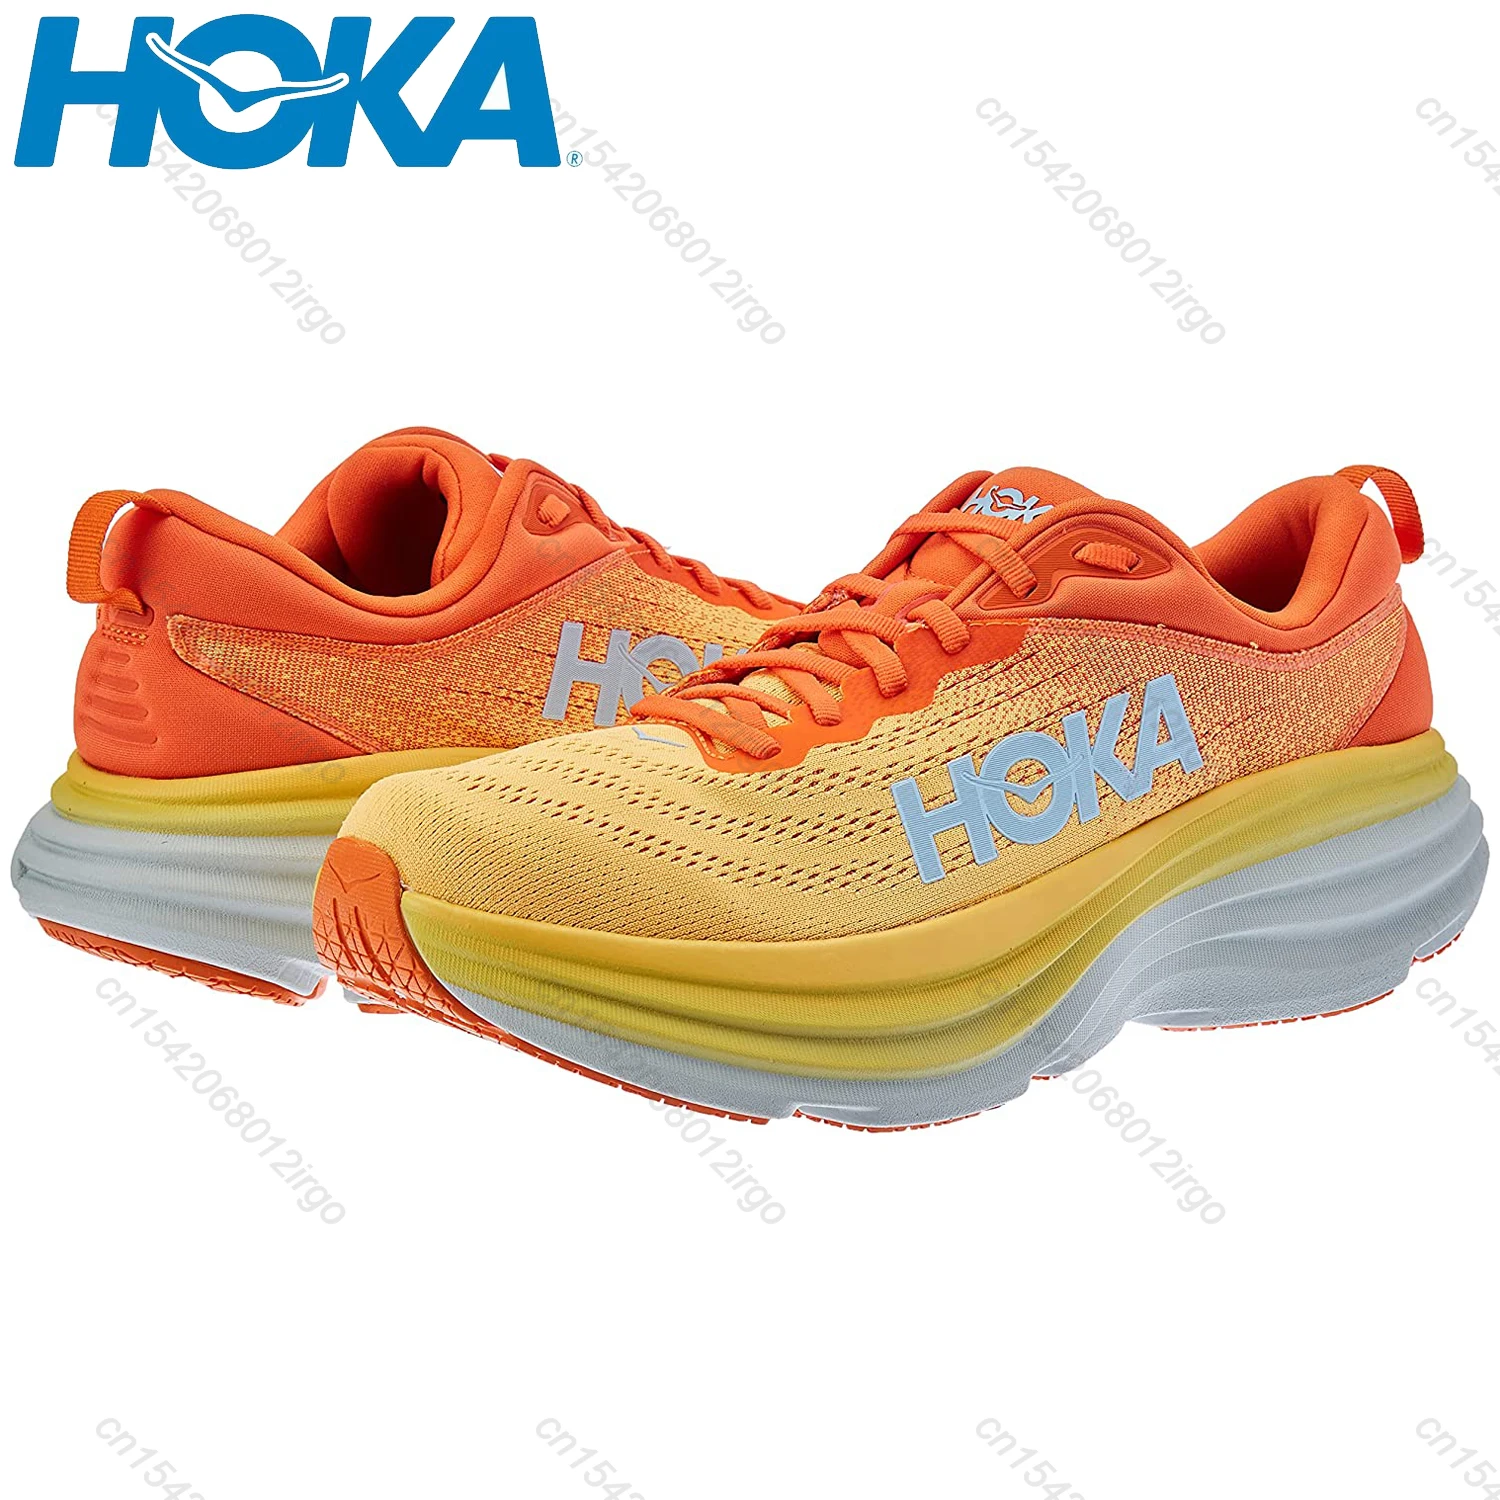 HOKA Bondi 8 Sneakers Men Athletic Running Shoes for Women Breathable Mesh Outdoor Non Slip Casual Walking Gym Male Sports Shoes